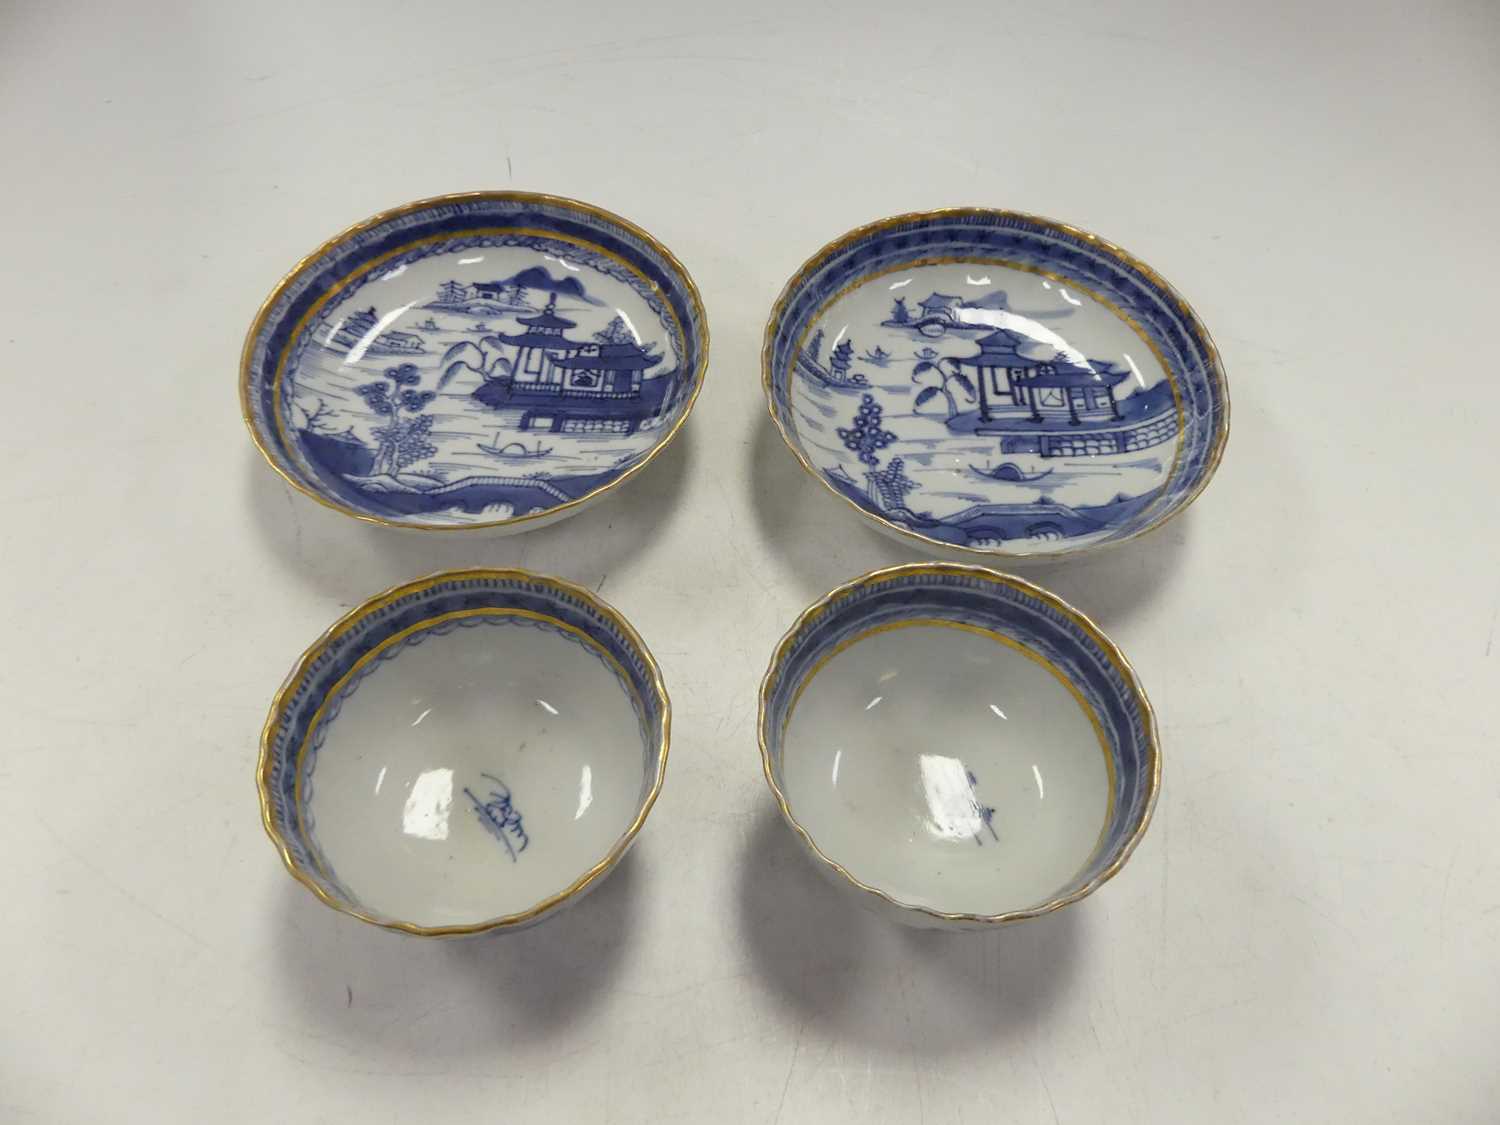 A collection of Asian ceramics, to include blue and white porcelain tea bowls Large bowl is - Image 6 of 9